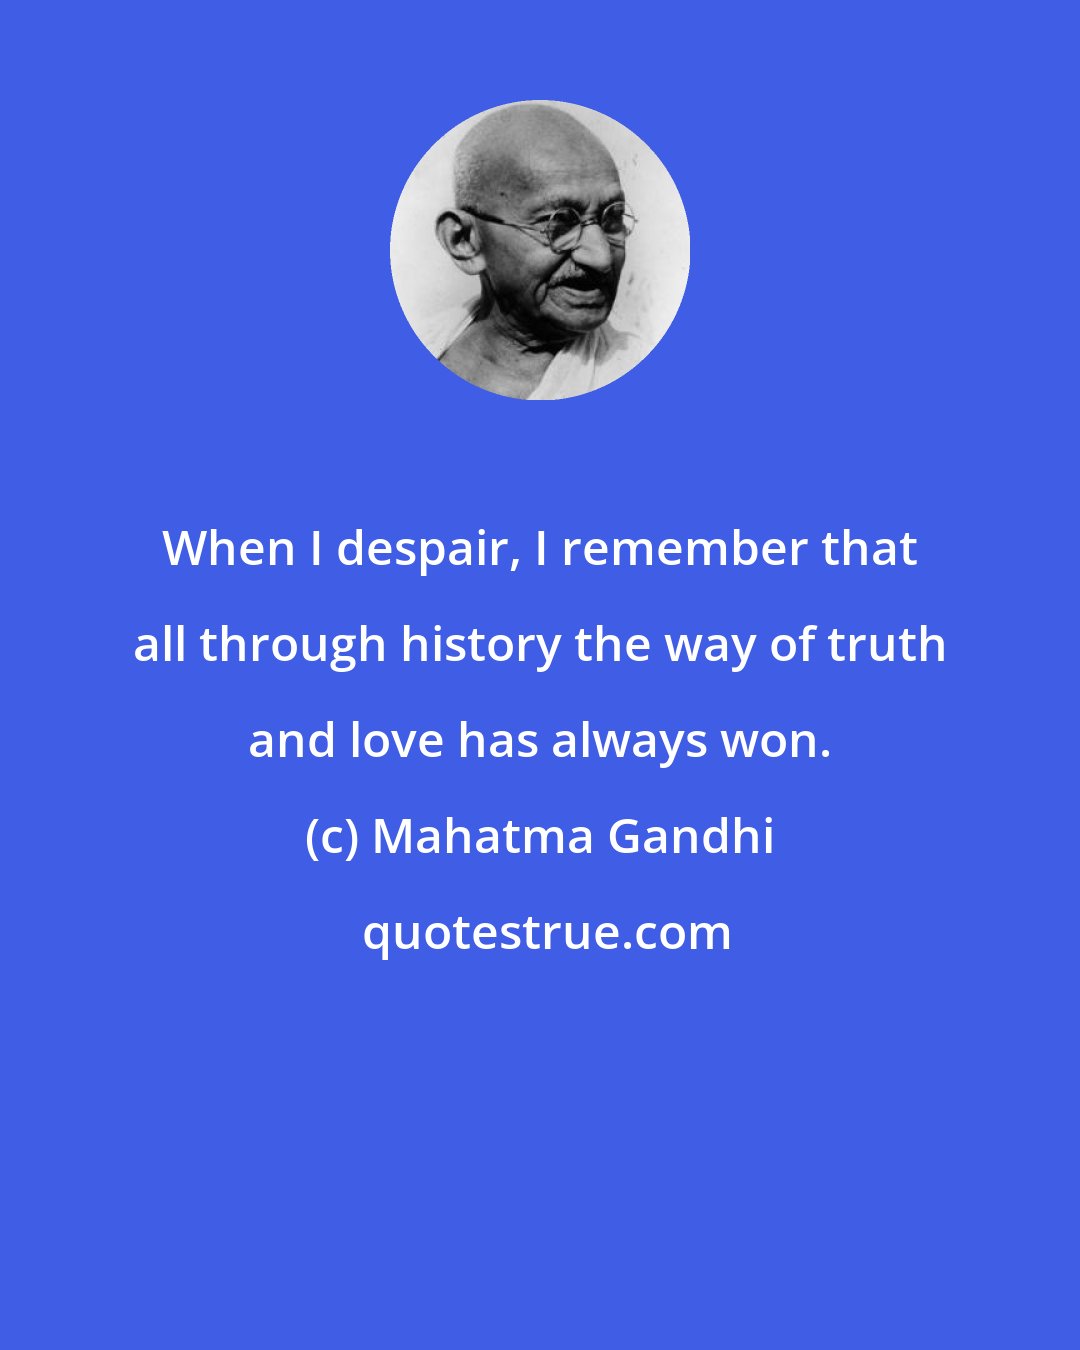 Mahatma Gandhi: When I despair, I remember that all through history the way of truth and love has always won.